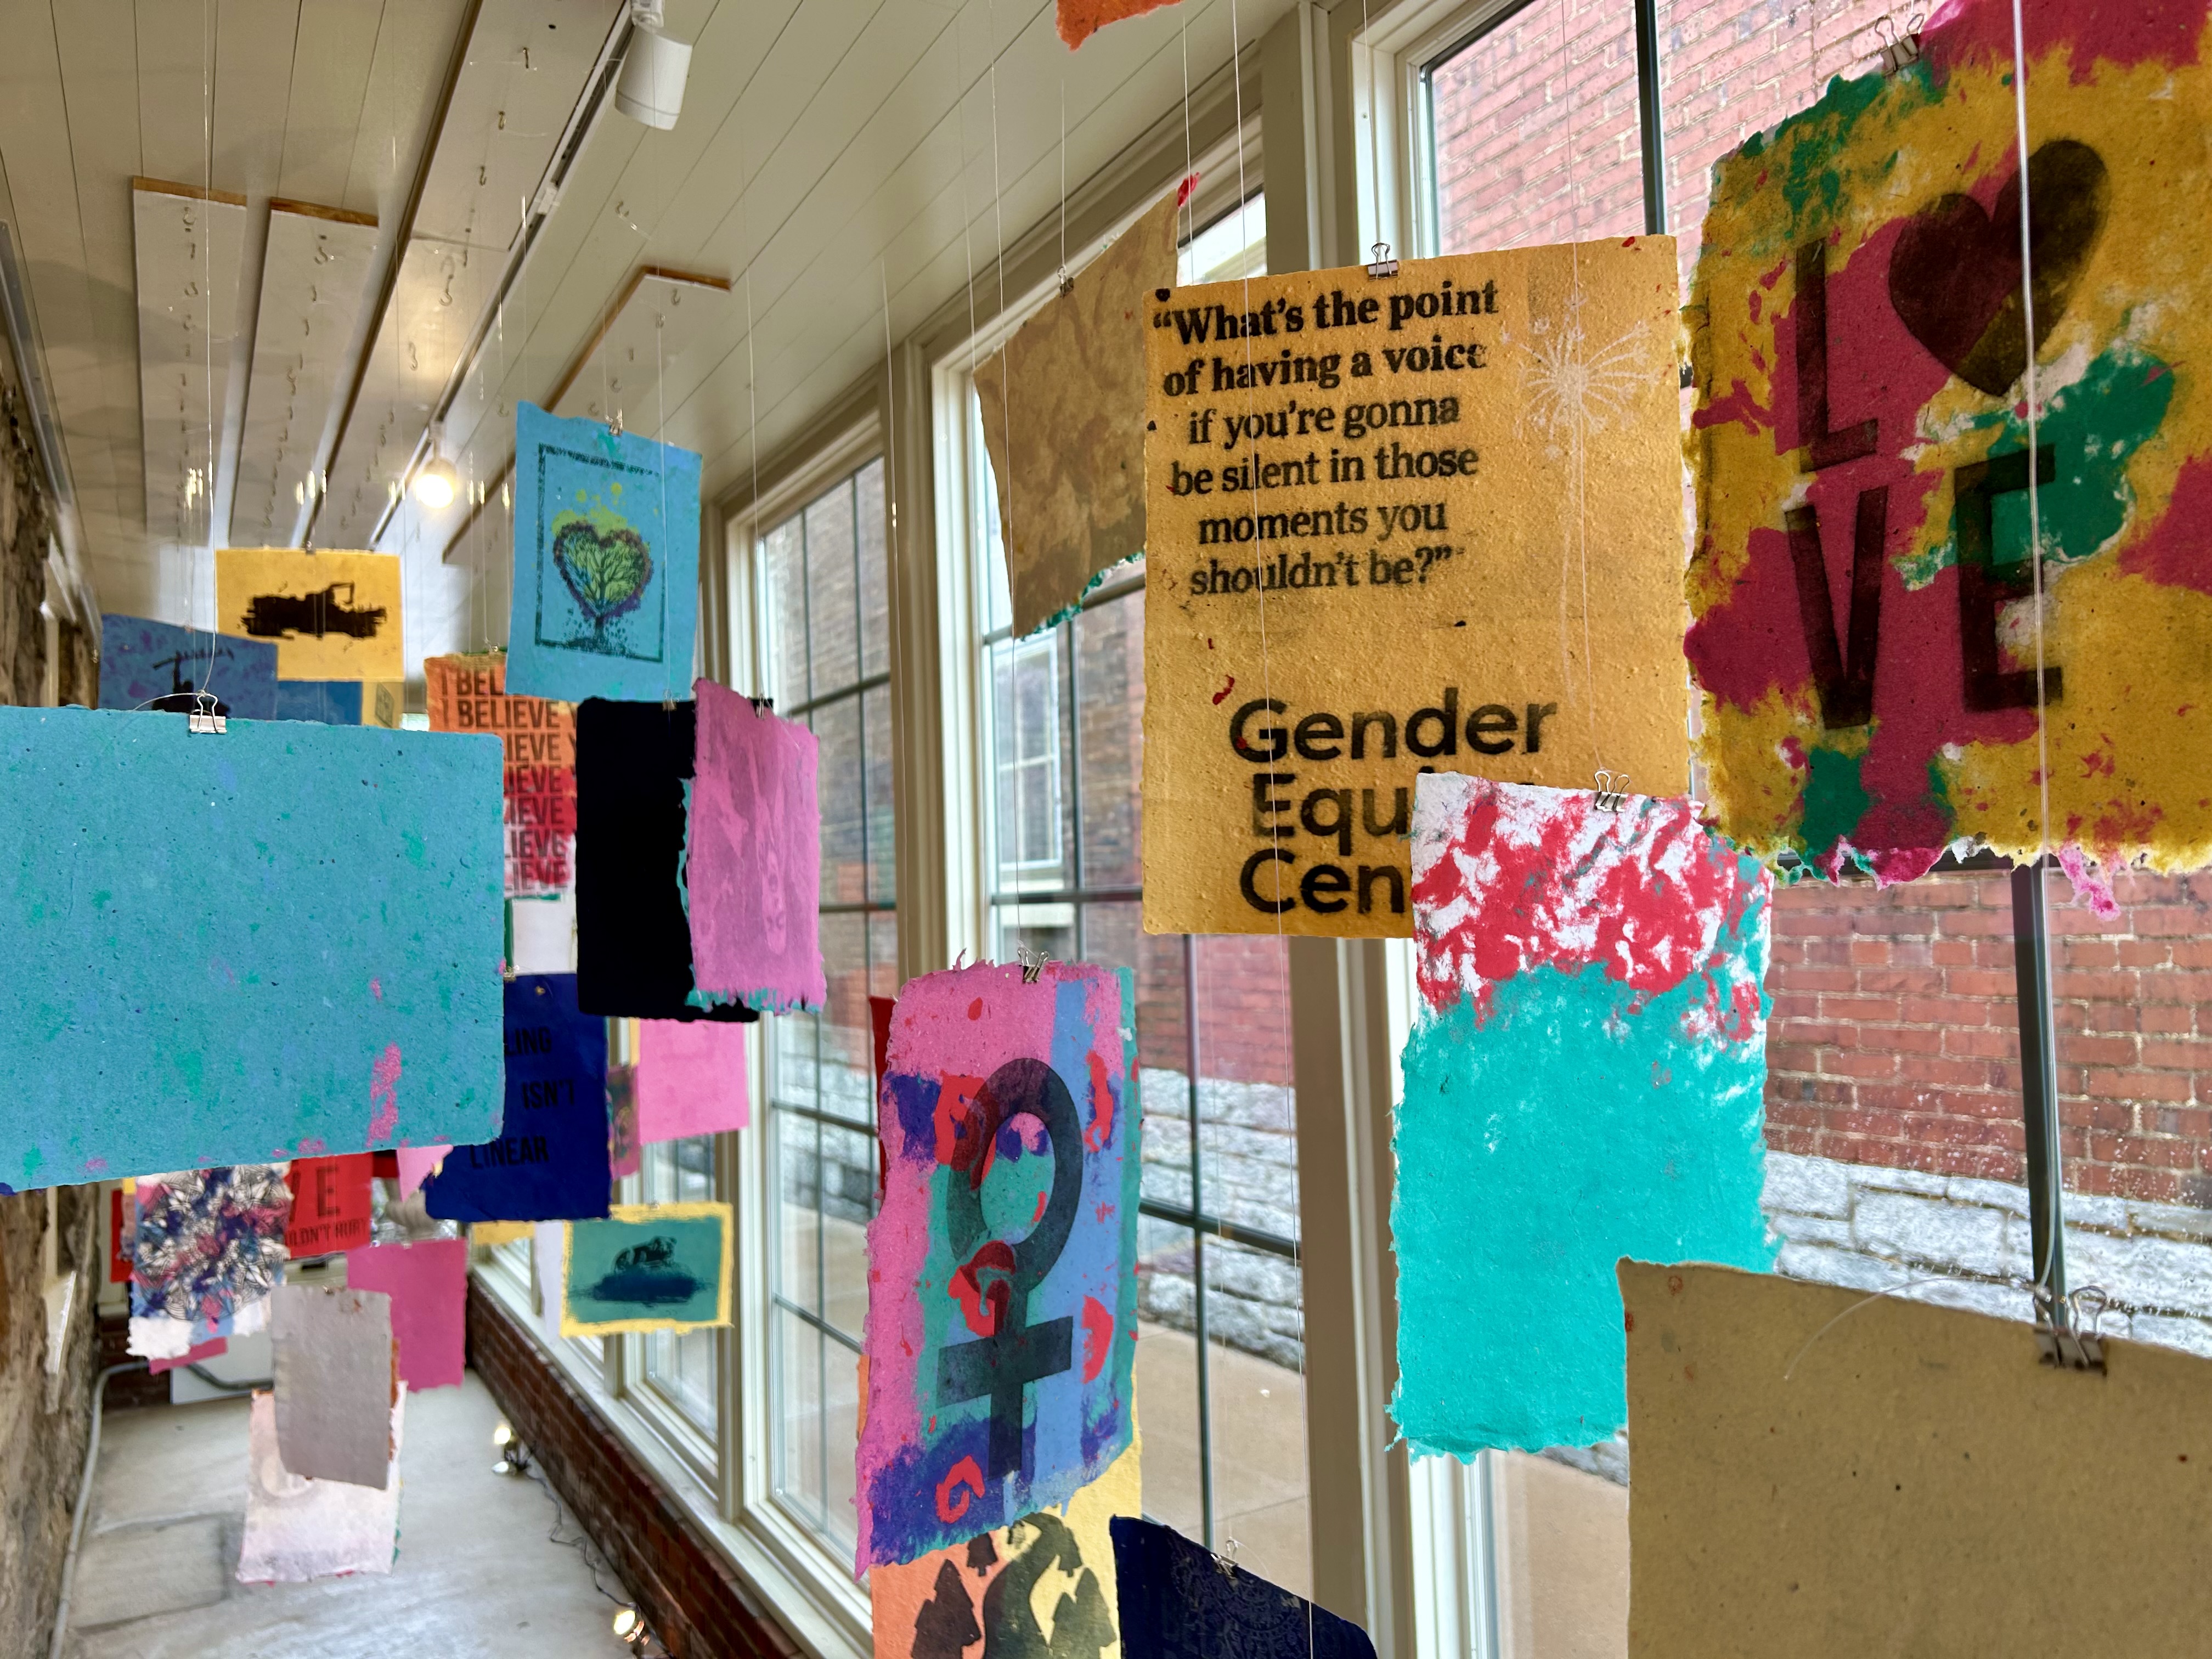 An installation of art focused on the Gender Equity Center mission